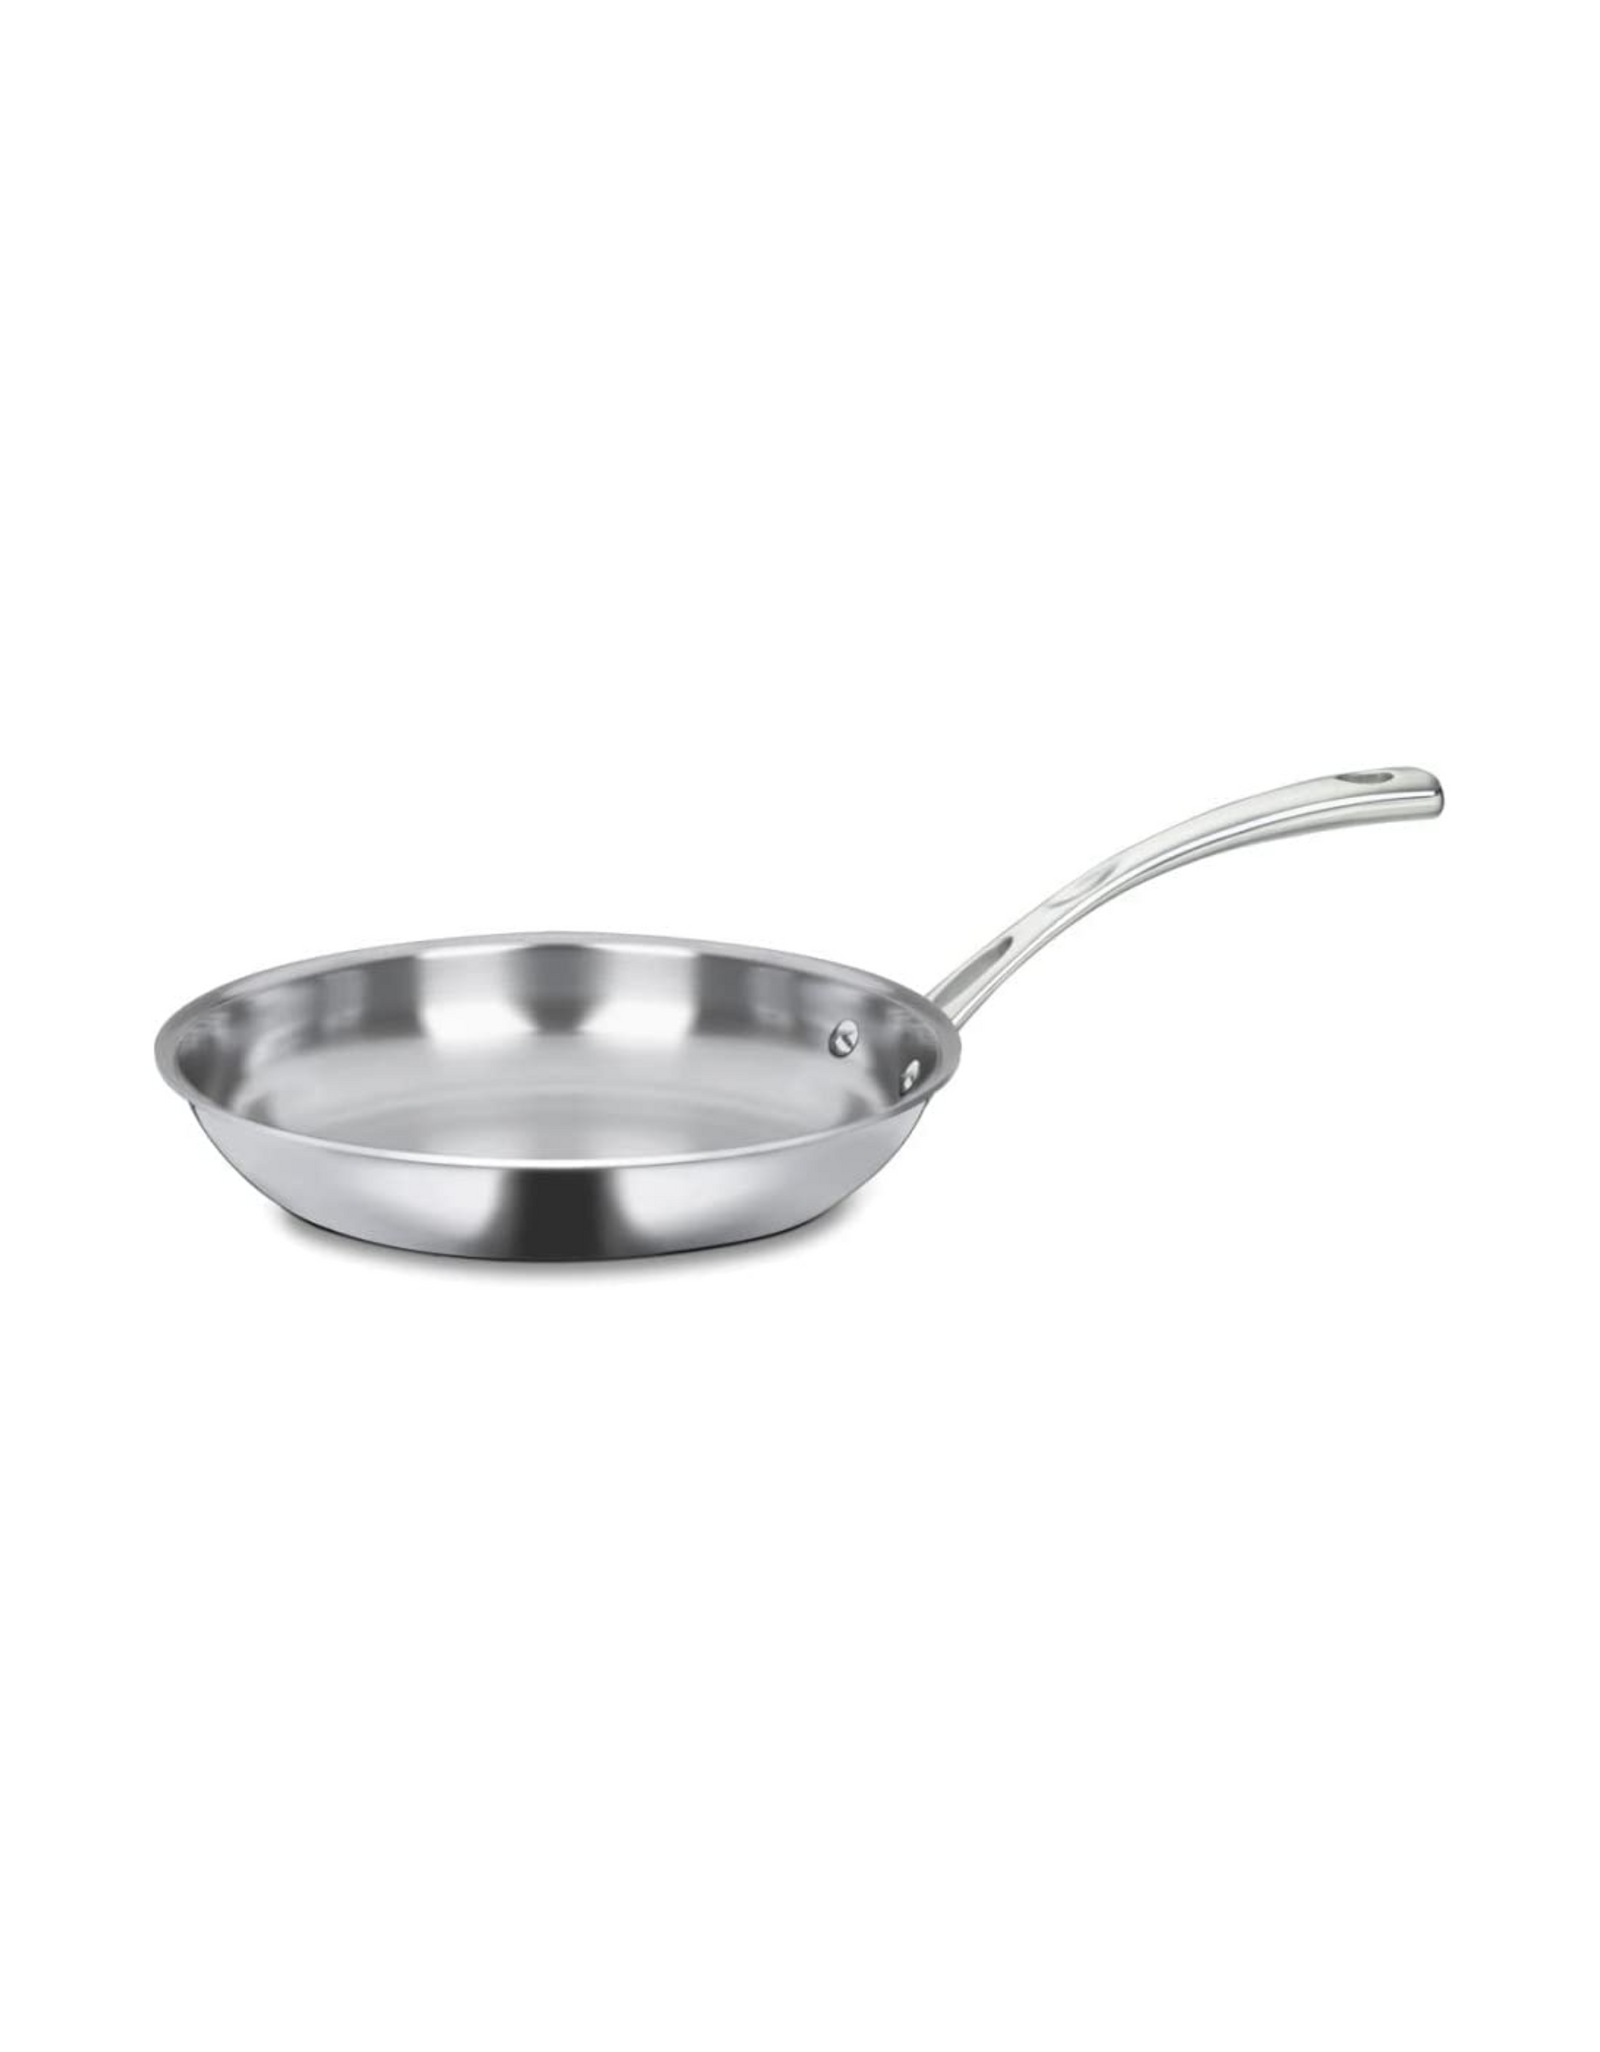 Cuisinart French Classic Tri-Ply Stainless Fry Pan, 10-Inch